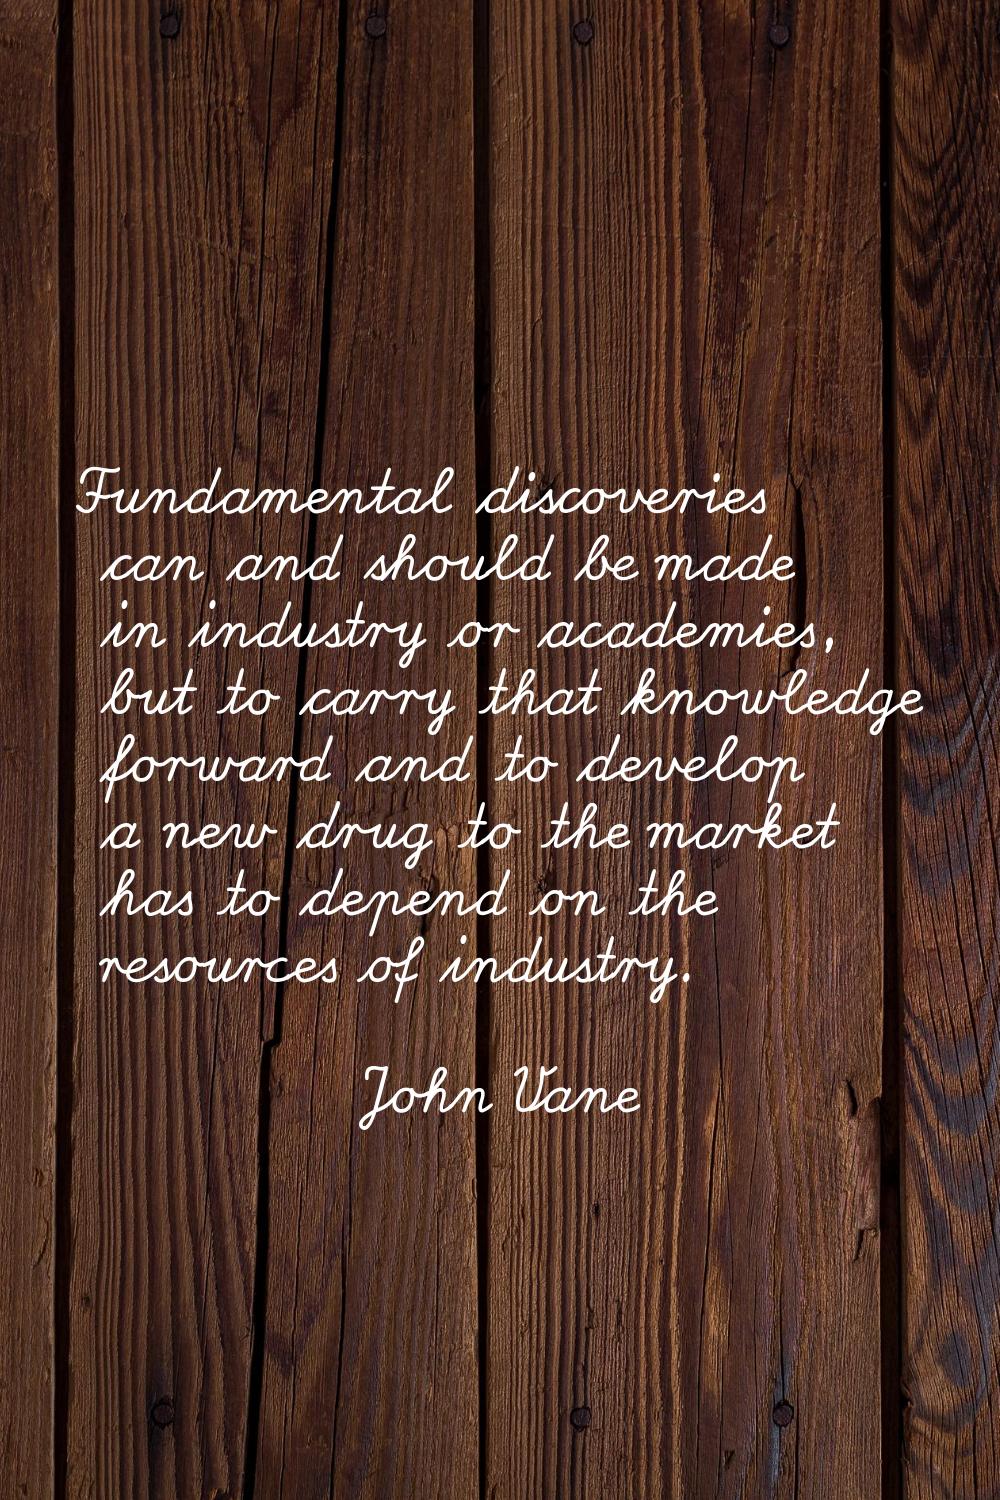 Fundamental discoveries can and should be made in industry or academies, but to carry that knowledg